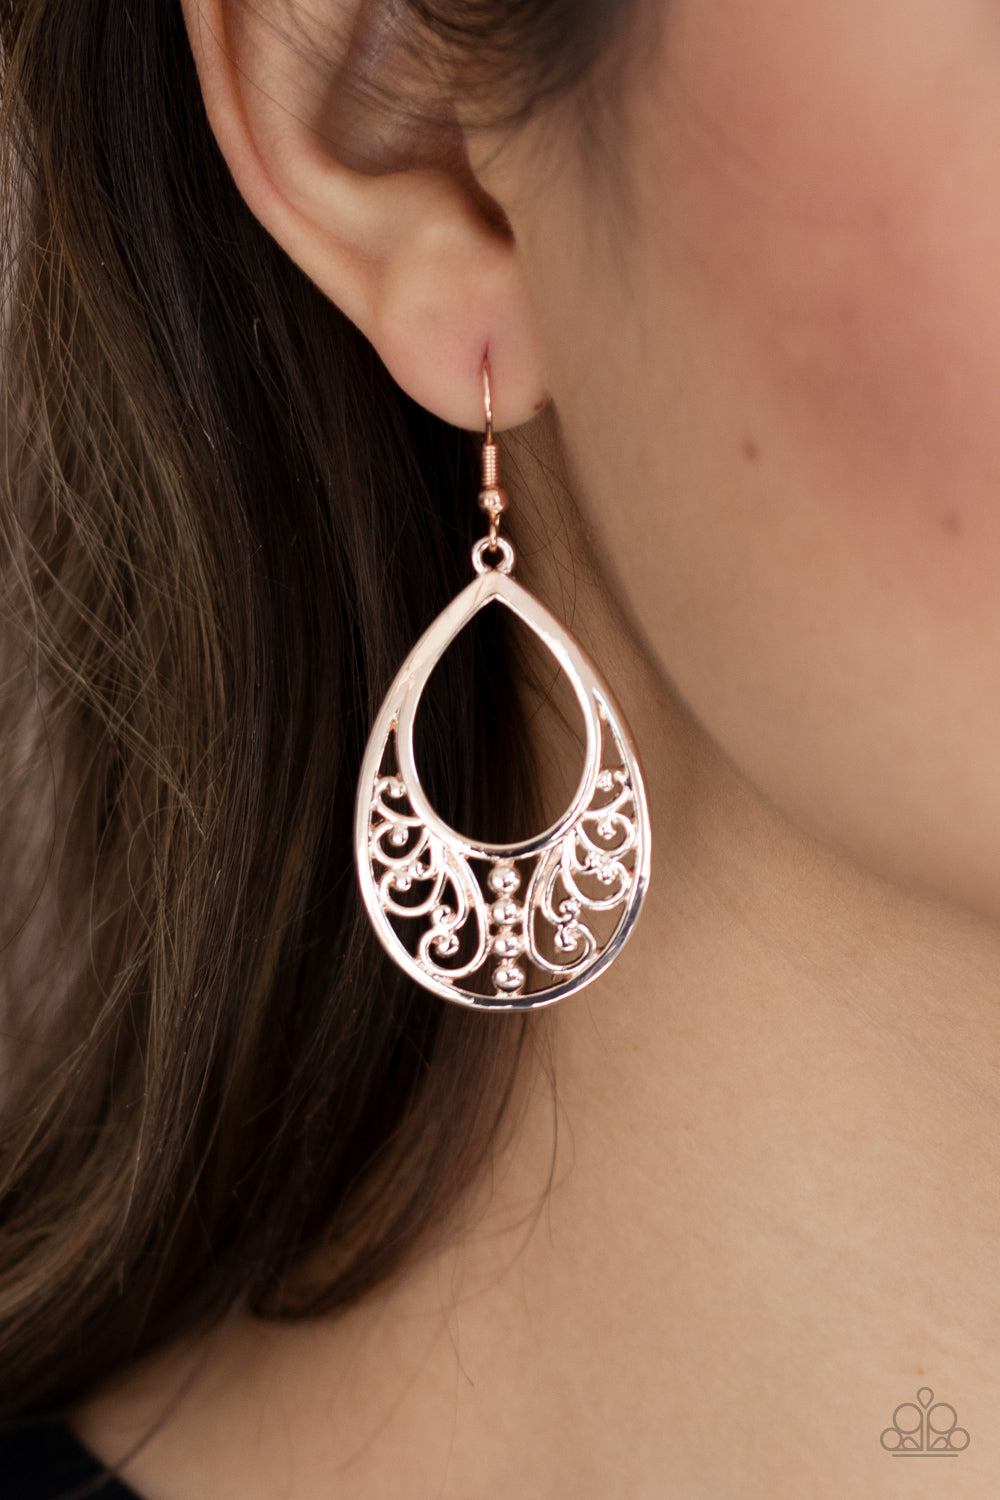 Stylish Serpentine- Rose Gold Earrings- Paparazzi Accessories